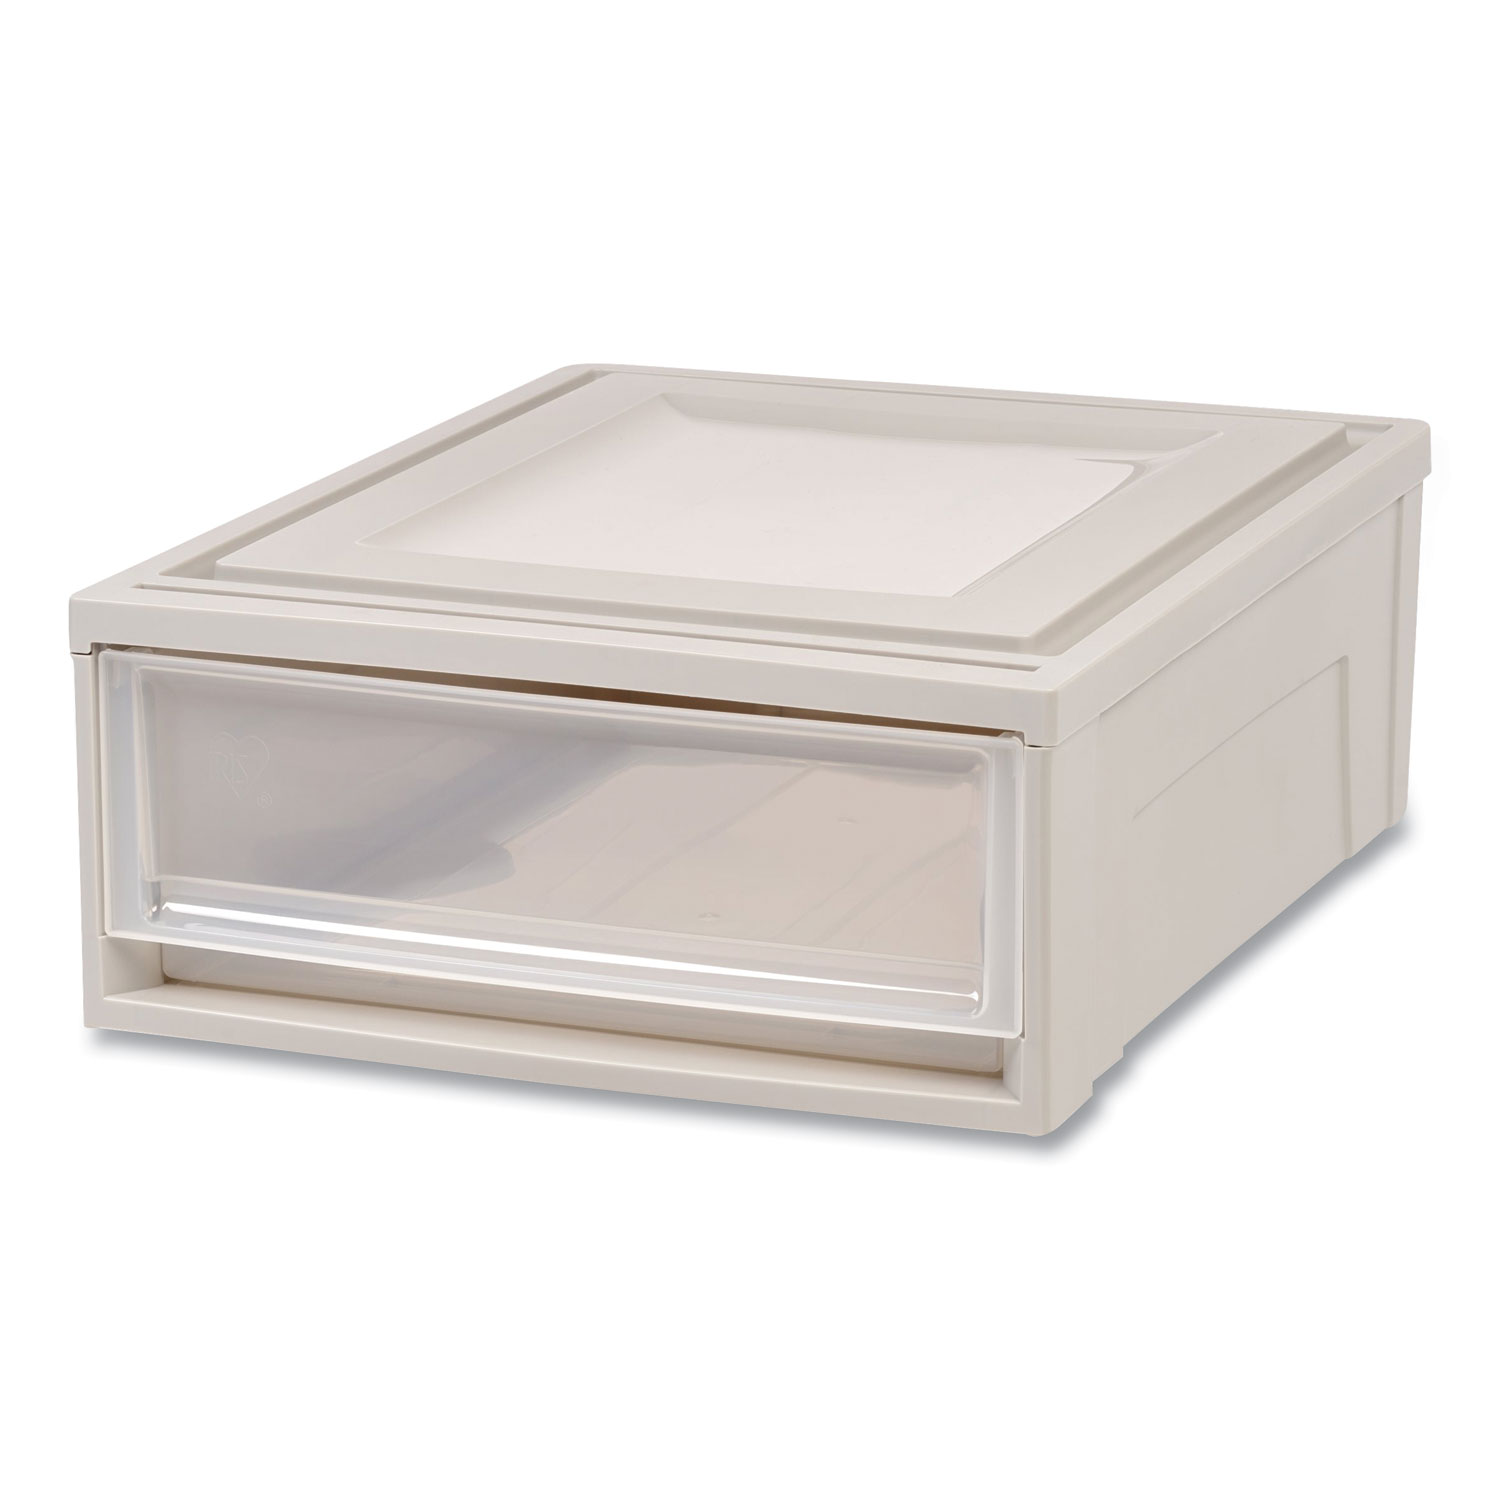 IRIS Stackable Storage Drawer, 5.5 gal, 15.7 x 19.7 x 6.5, Gray/Translucent Frost